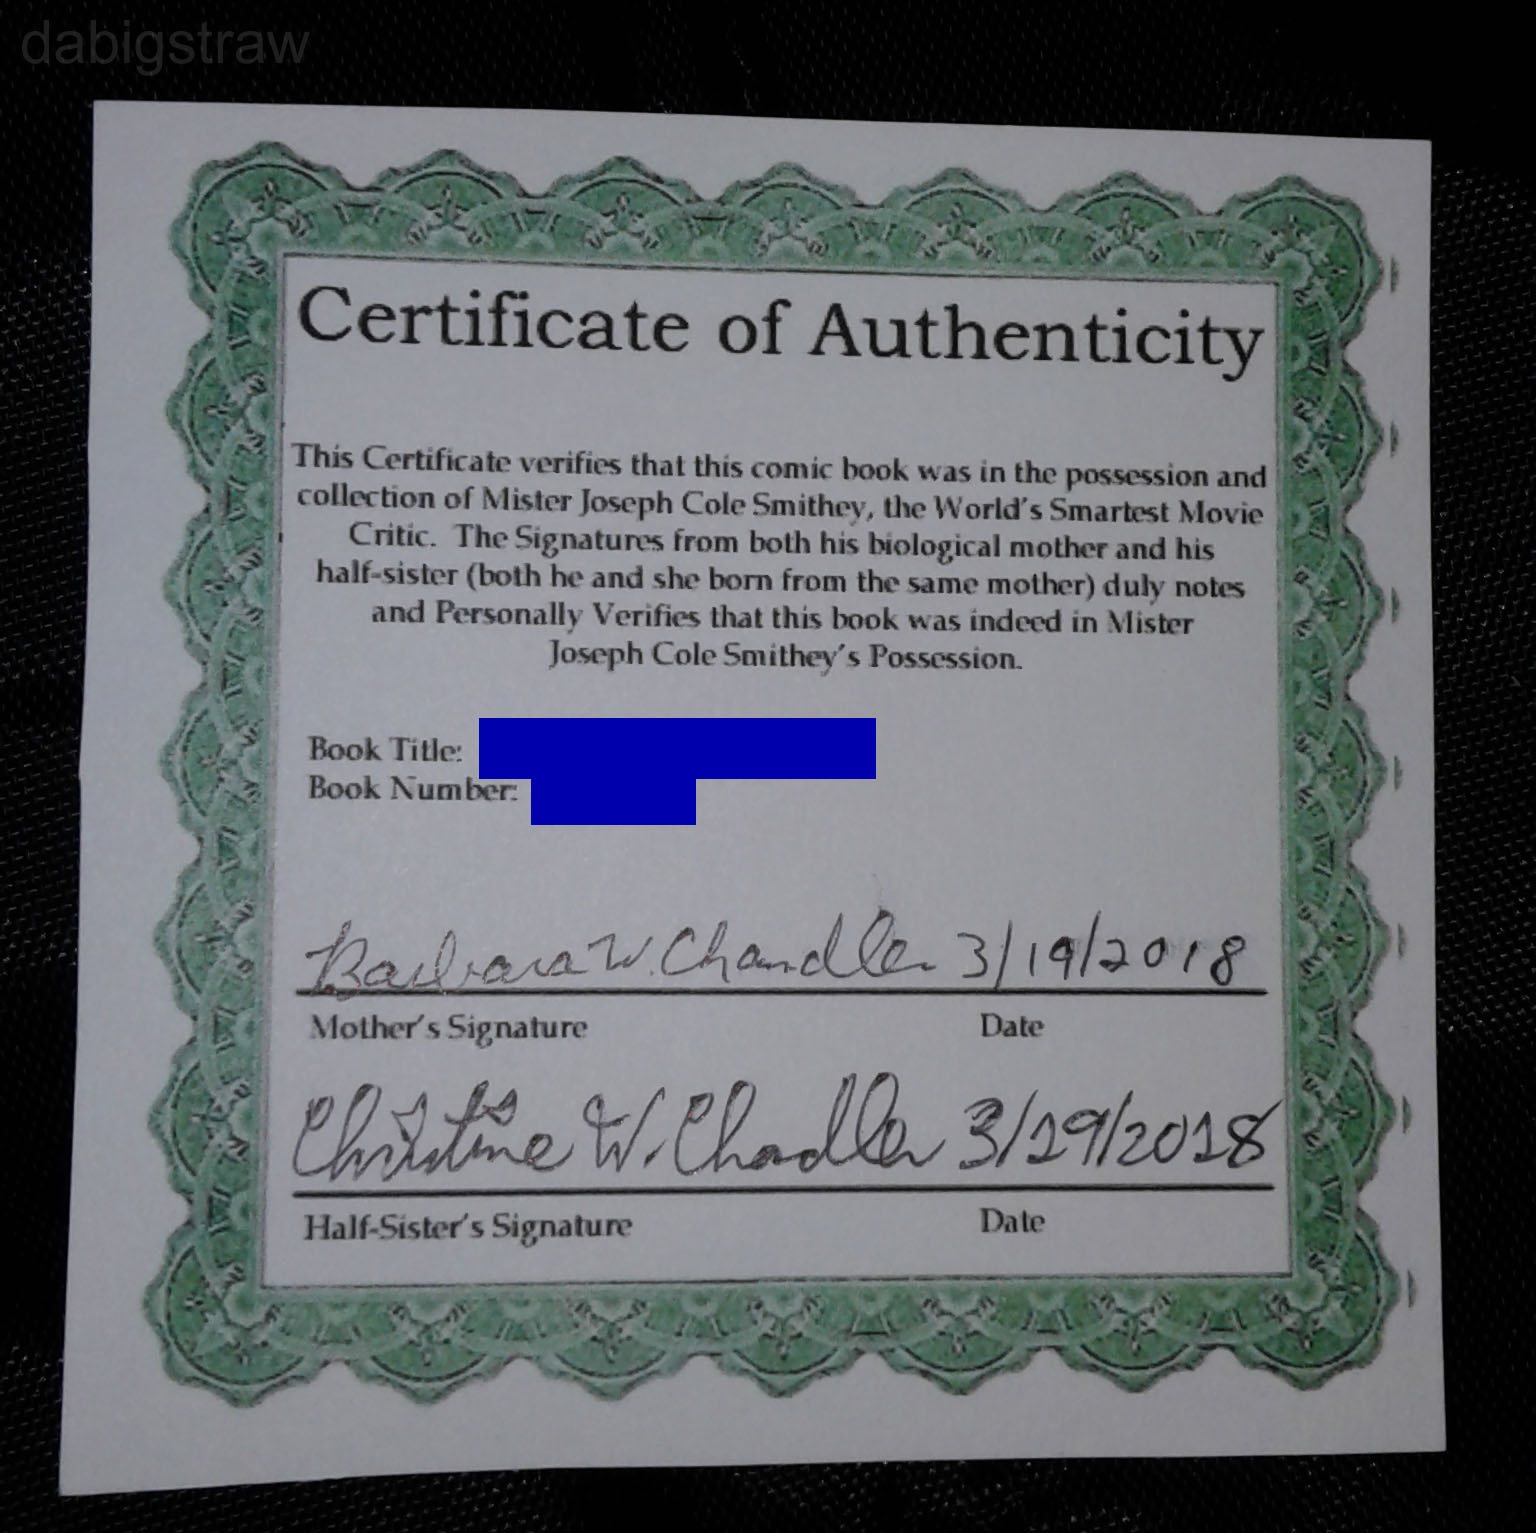 File:Certificate of Authenticity with Barb's signature.jpg - CWCki